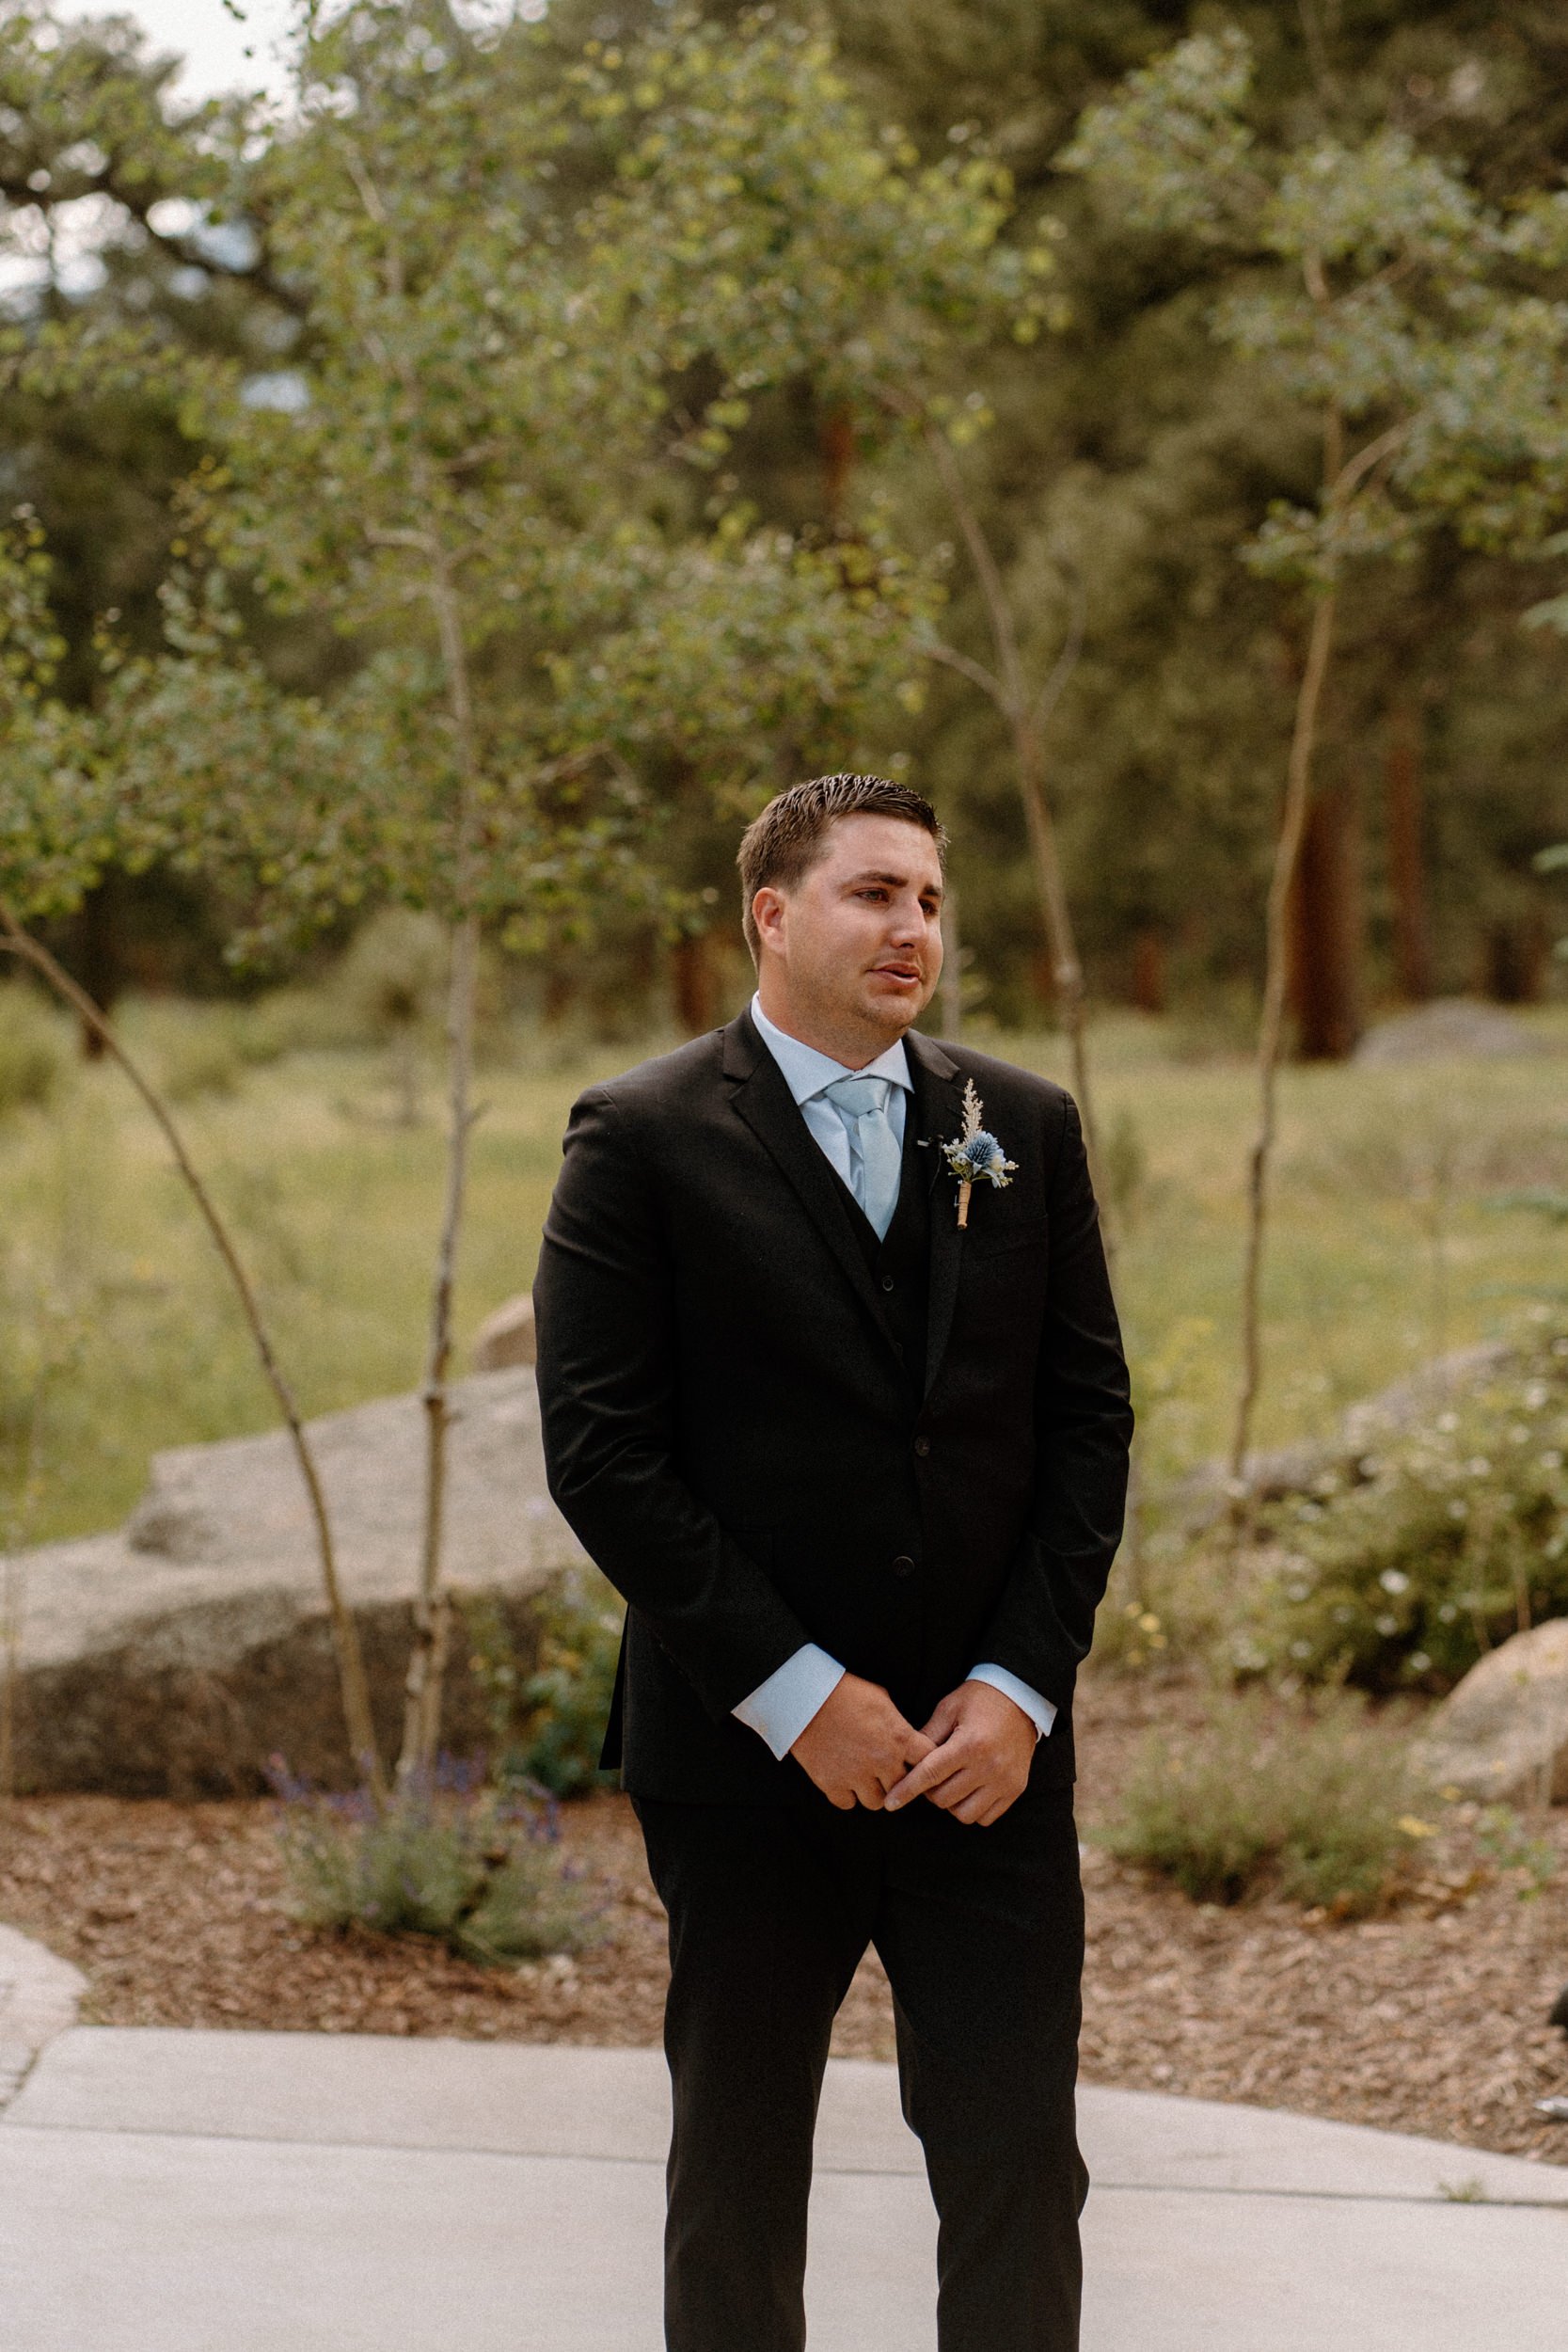 The groom emotionally watches the bride walk down the aisle toward him